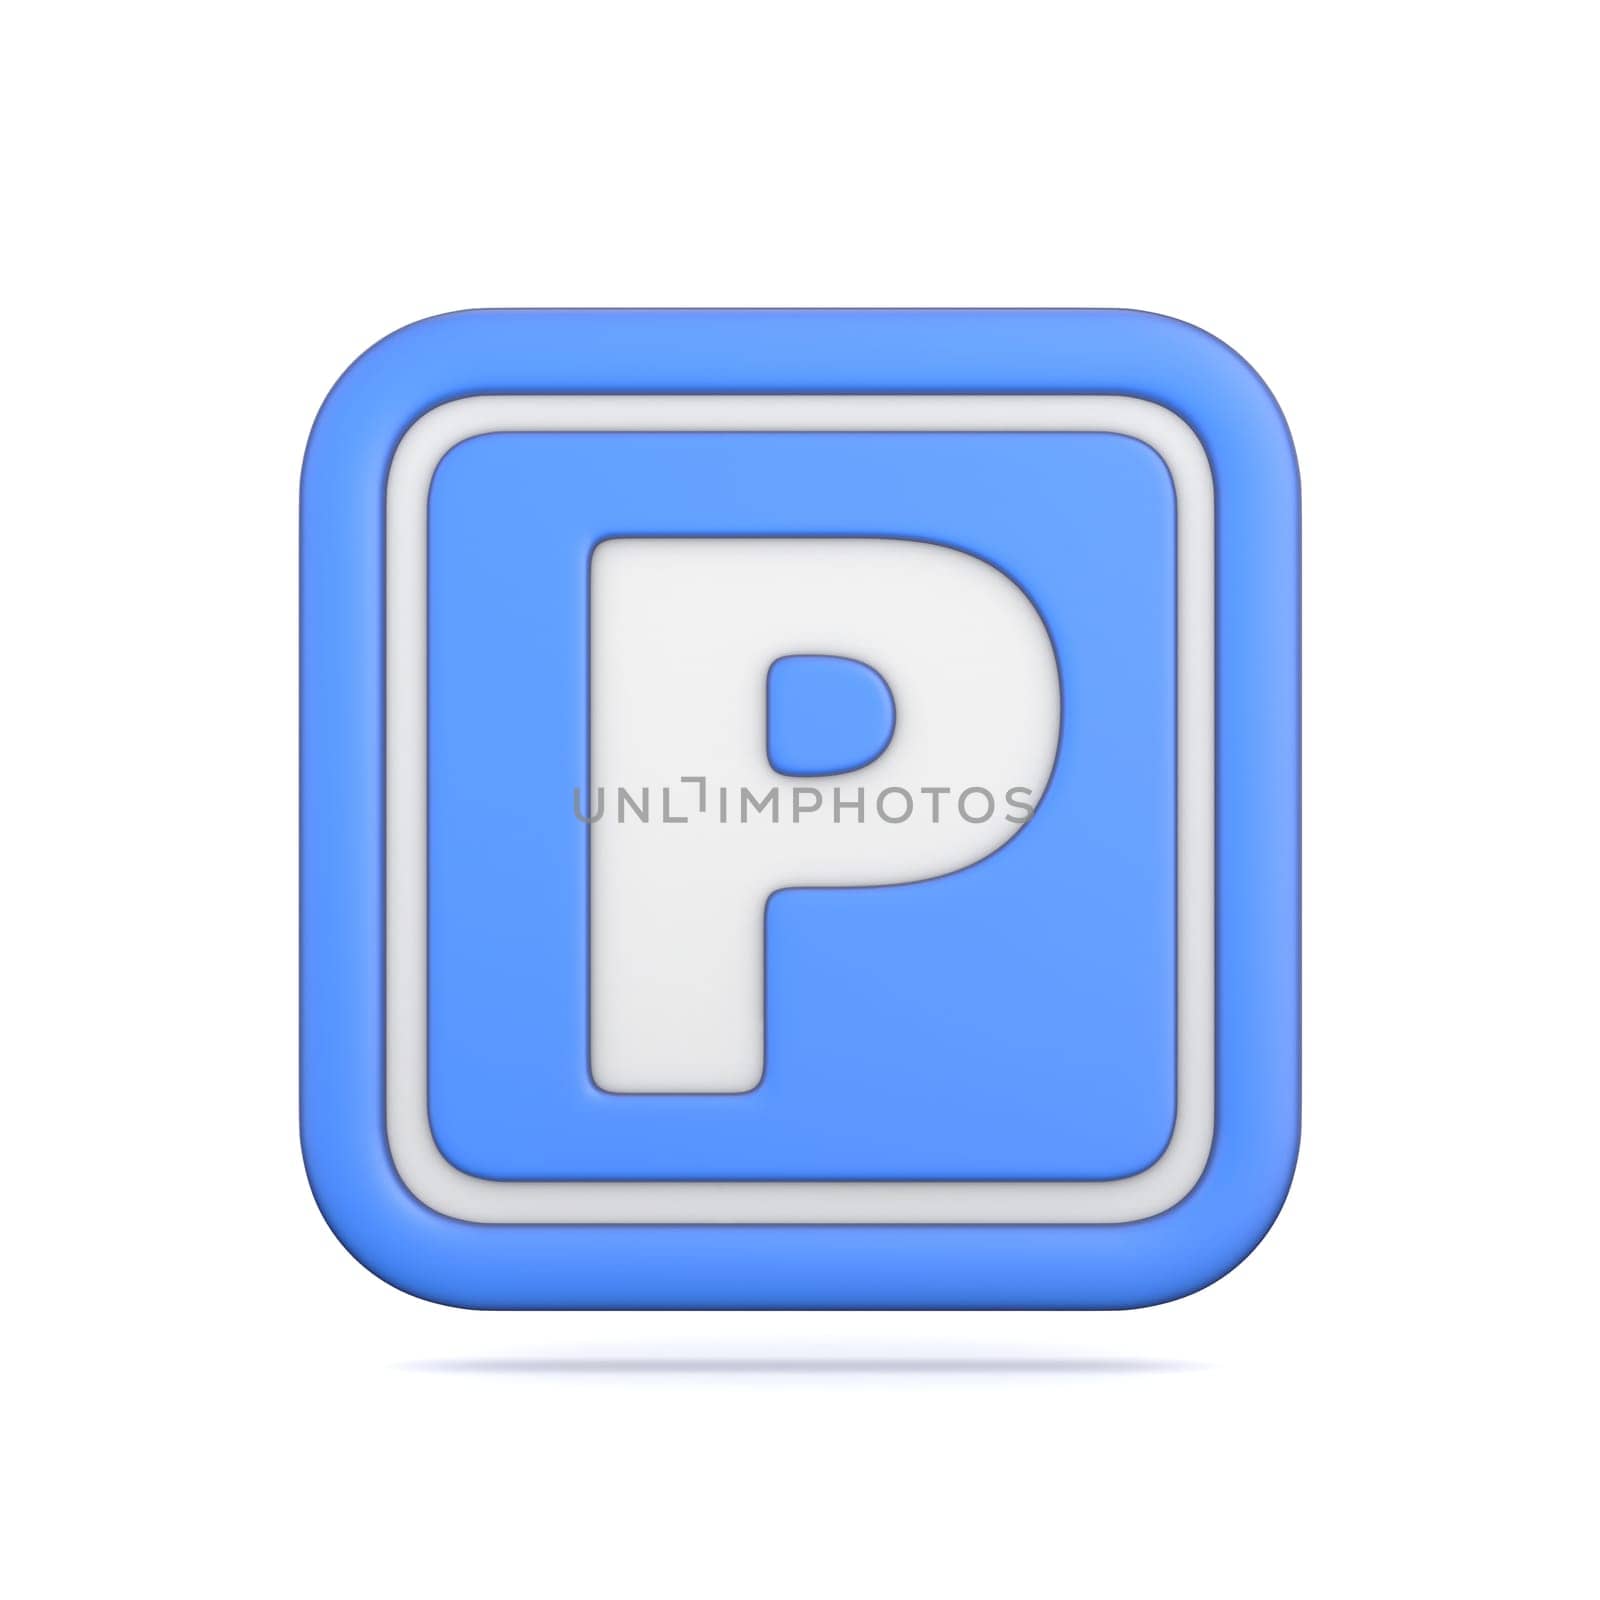 Traffic sign Parking sign 3D rendering illustration isolated on white background